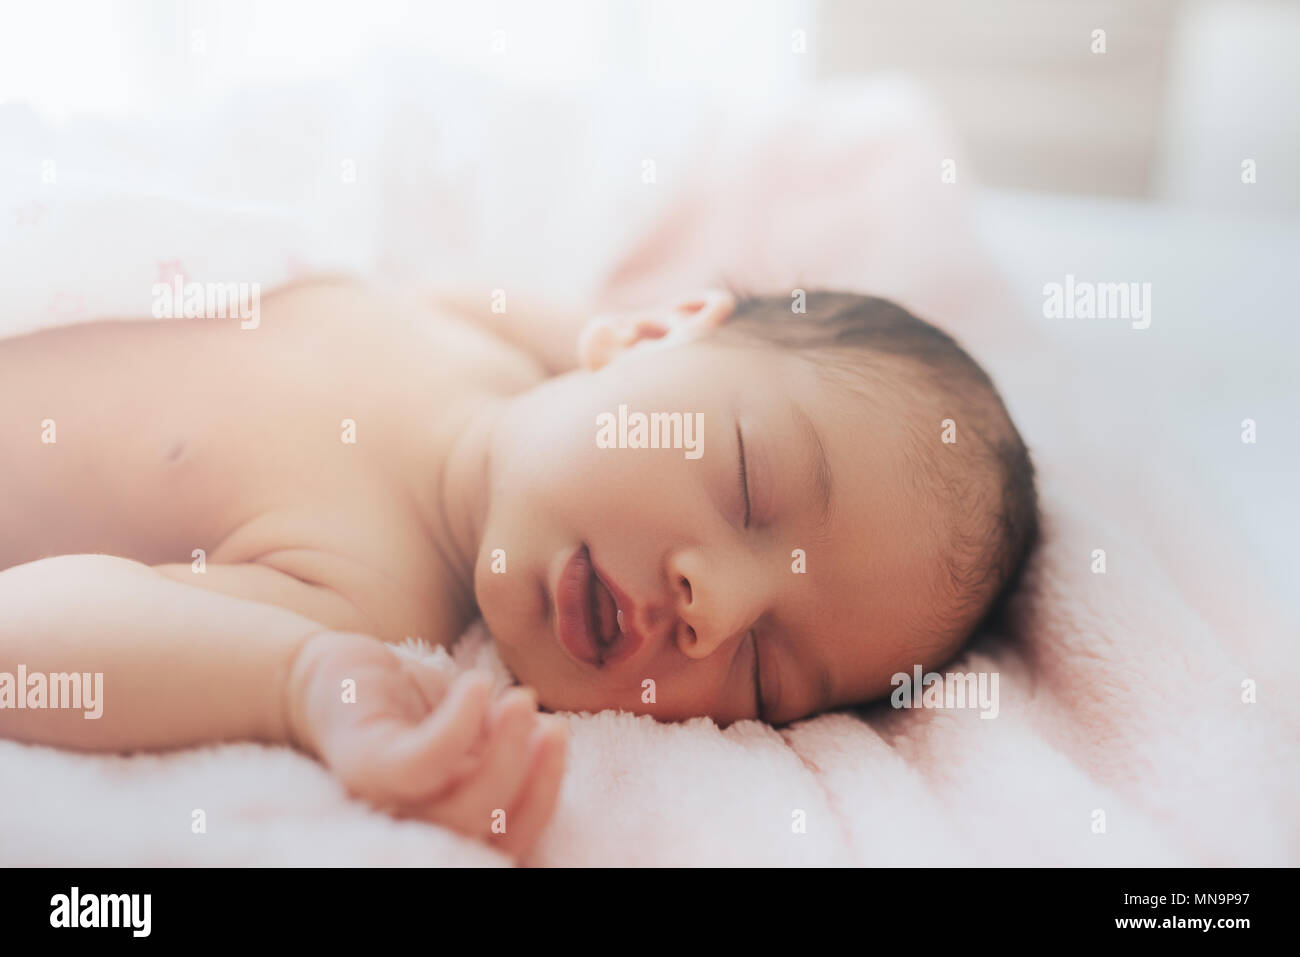 newborn sleeping baby , close-up, lifestyle, the concept of purity and innocence, Stock Photo